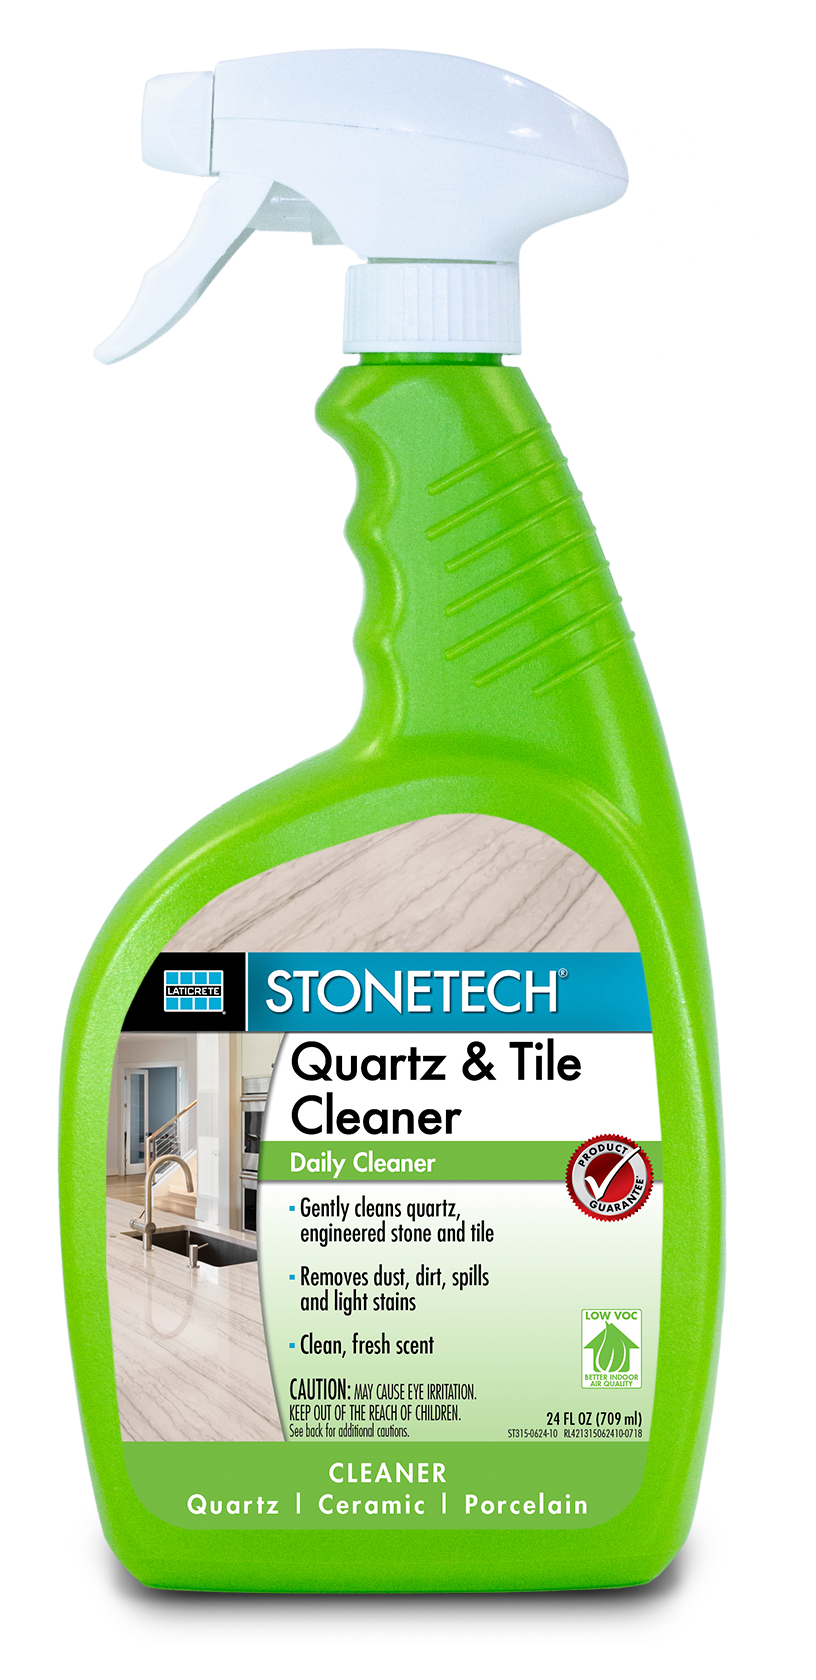 How To Remove A Stain From Quartz, Quartz Stain Removal How to